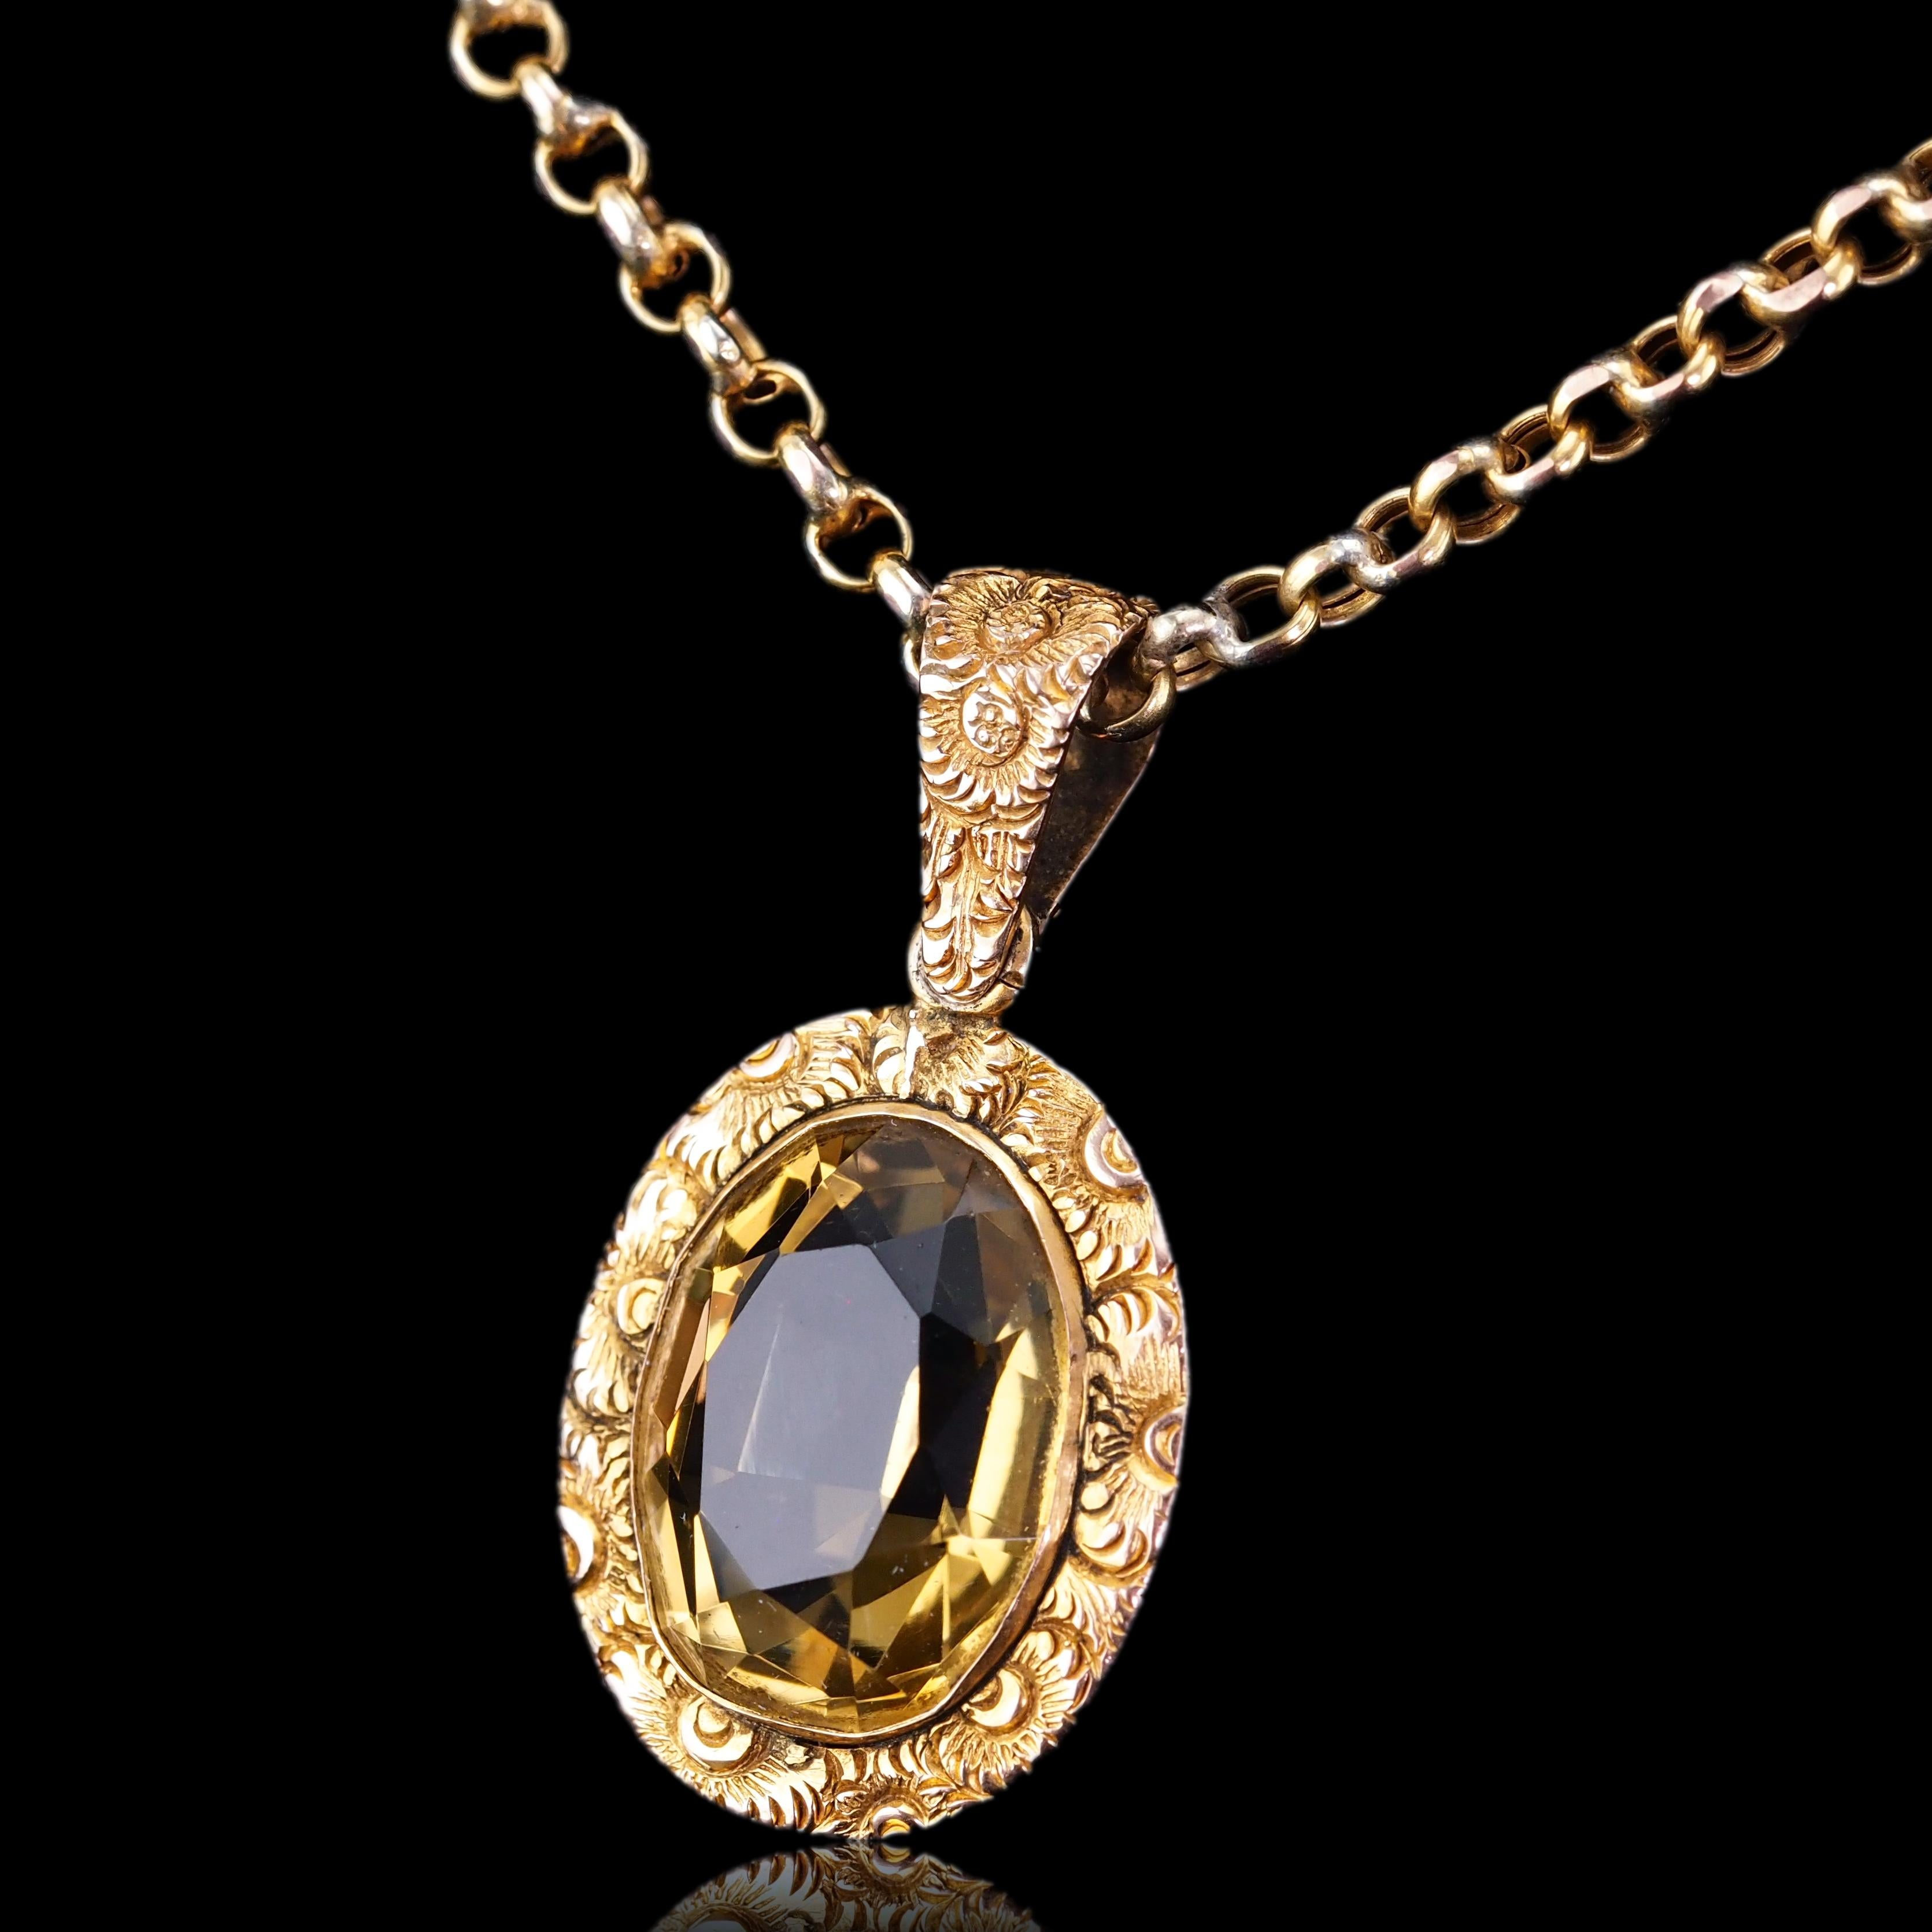 Antique Victorian Citrine Necklace with Chased Floral Pendant 9K Gold c.1850 10